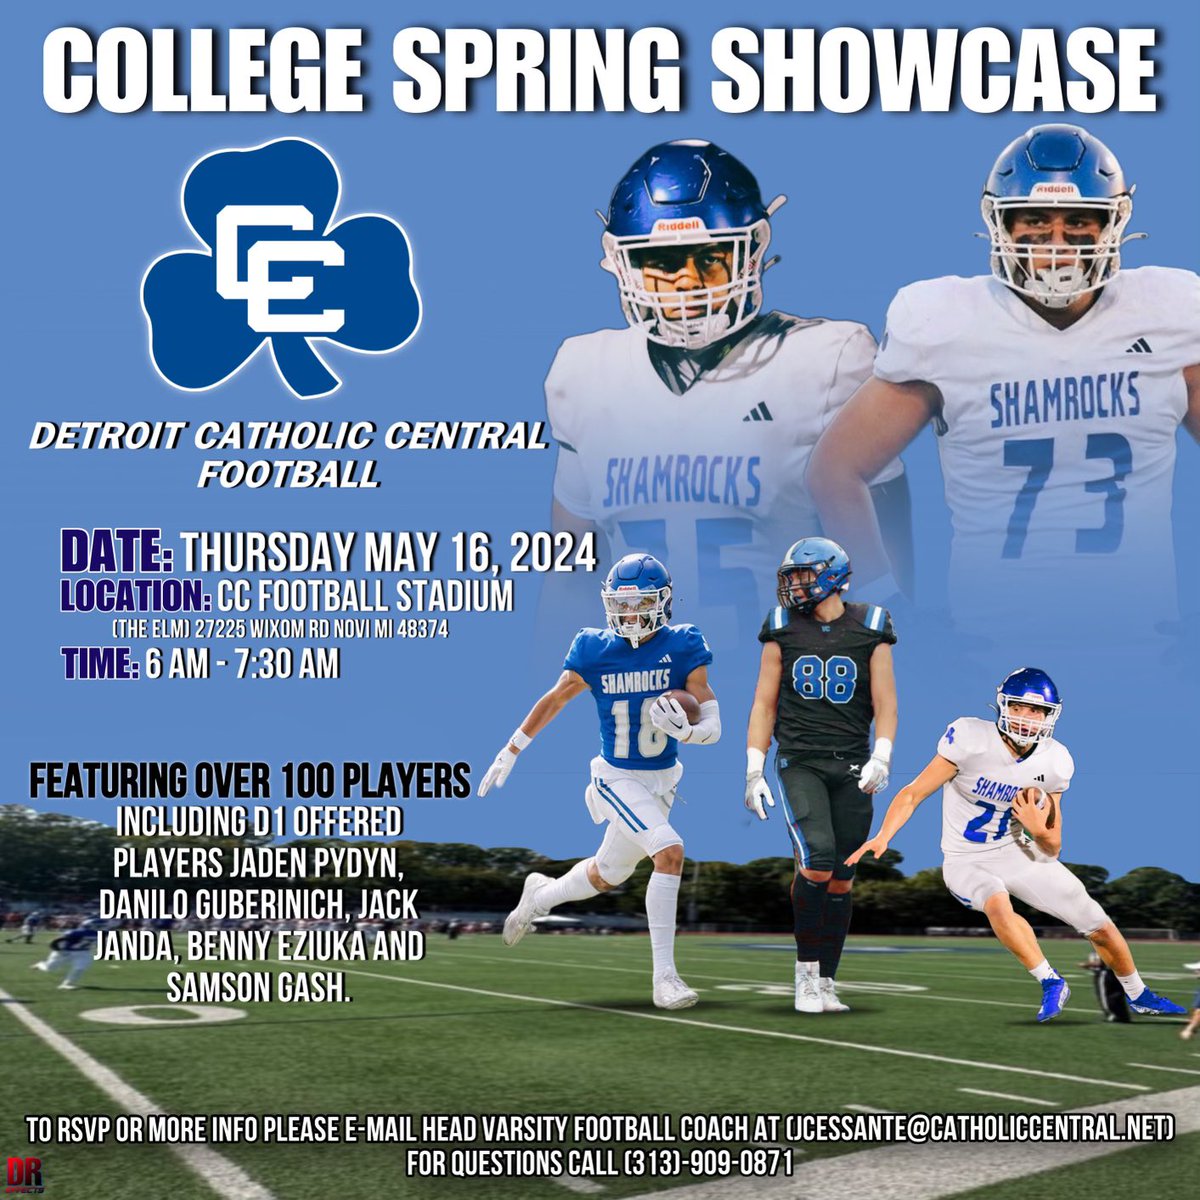 Detroit Catholic Central HS College Football Showcase Thursday May 16, 2024 6:00am in the morning Tom Mach Football Field